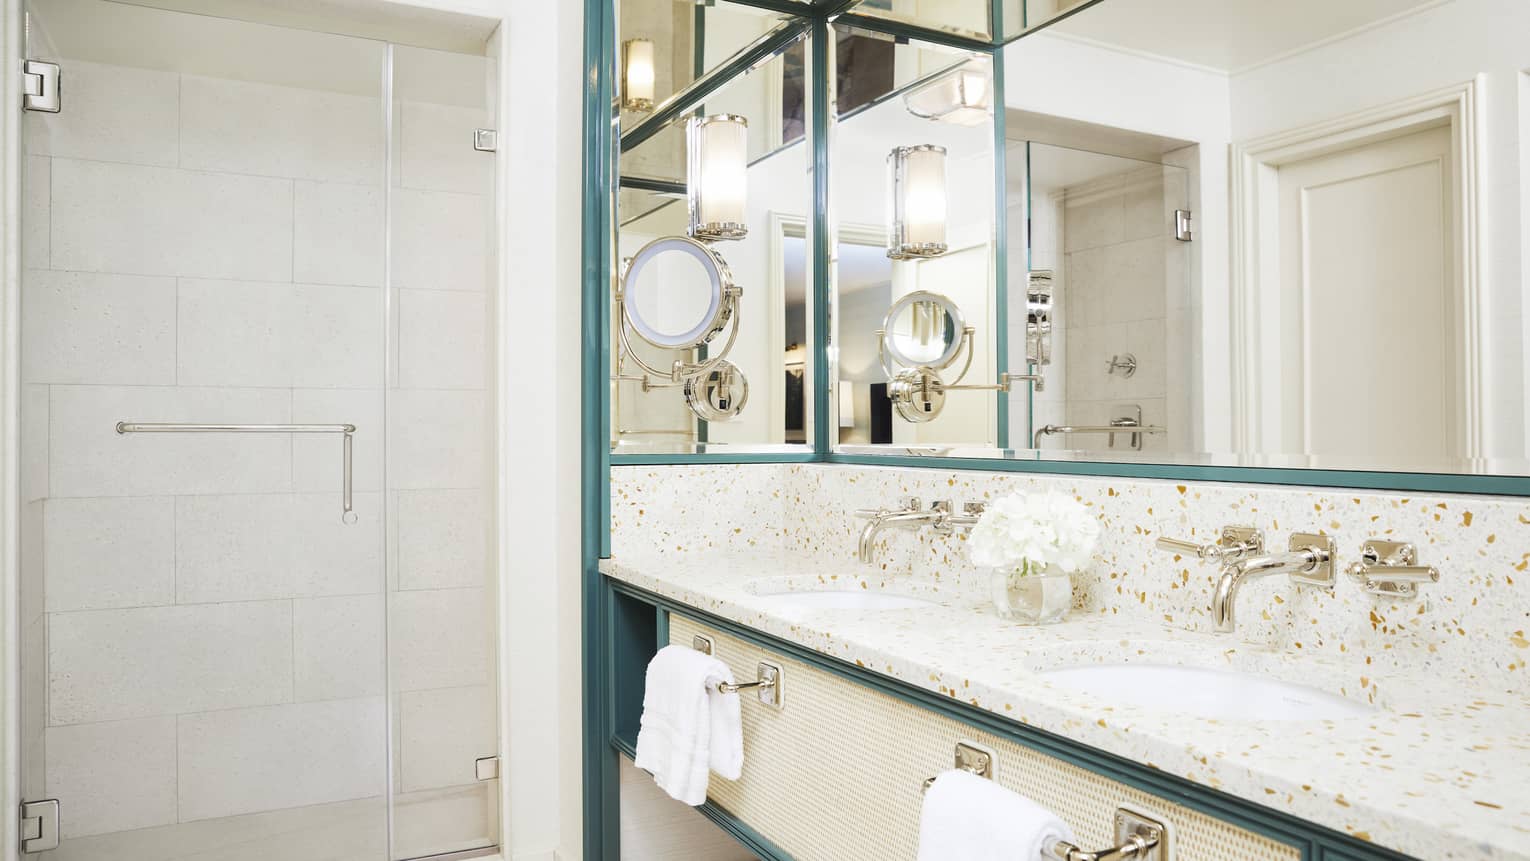 A bright bathroom has metal accents and marble countertops